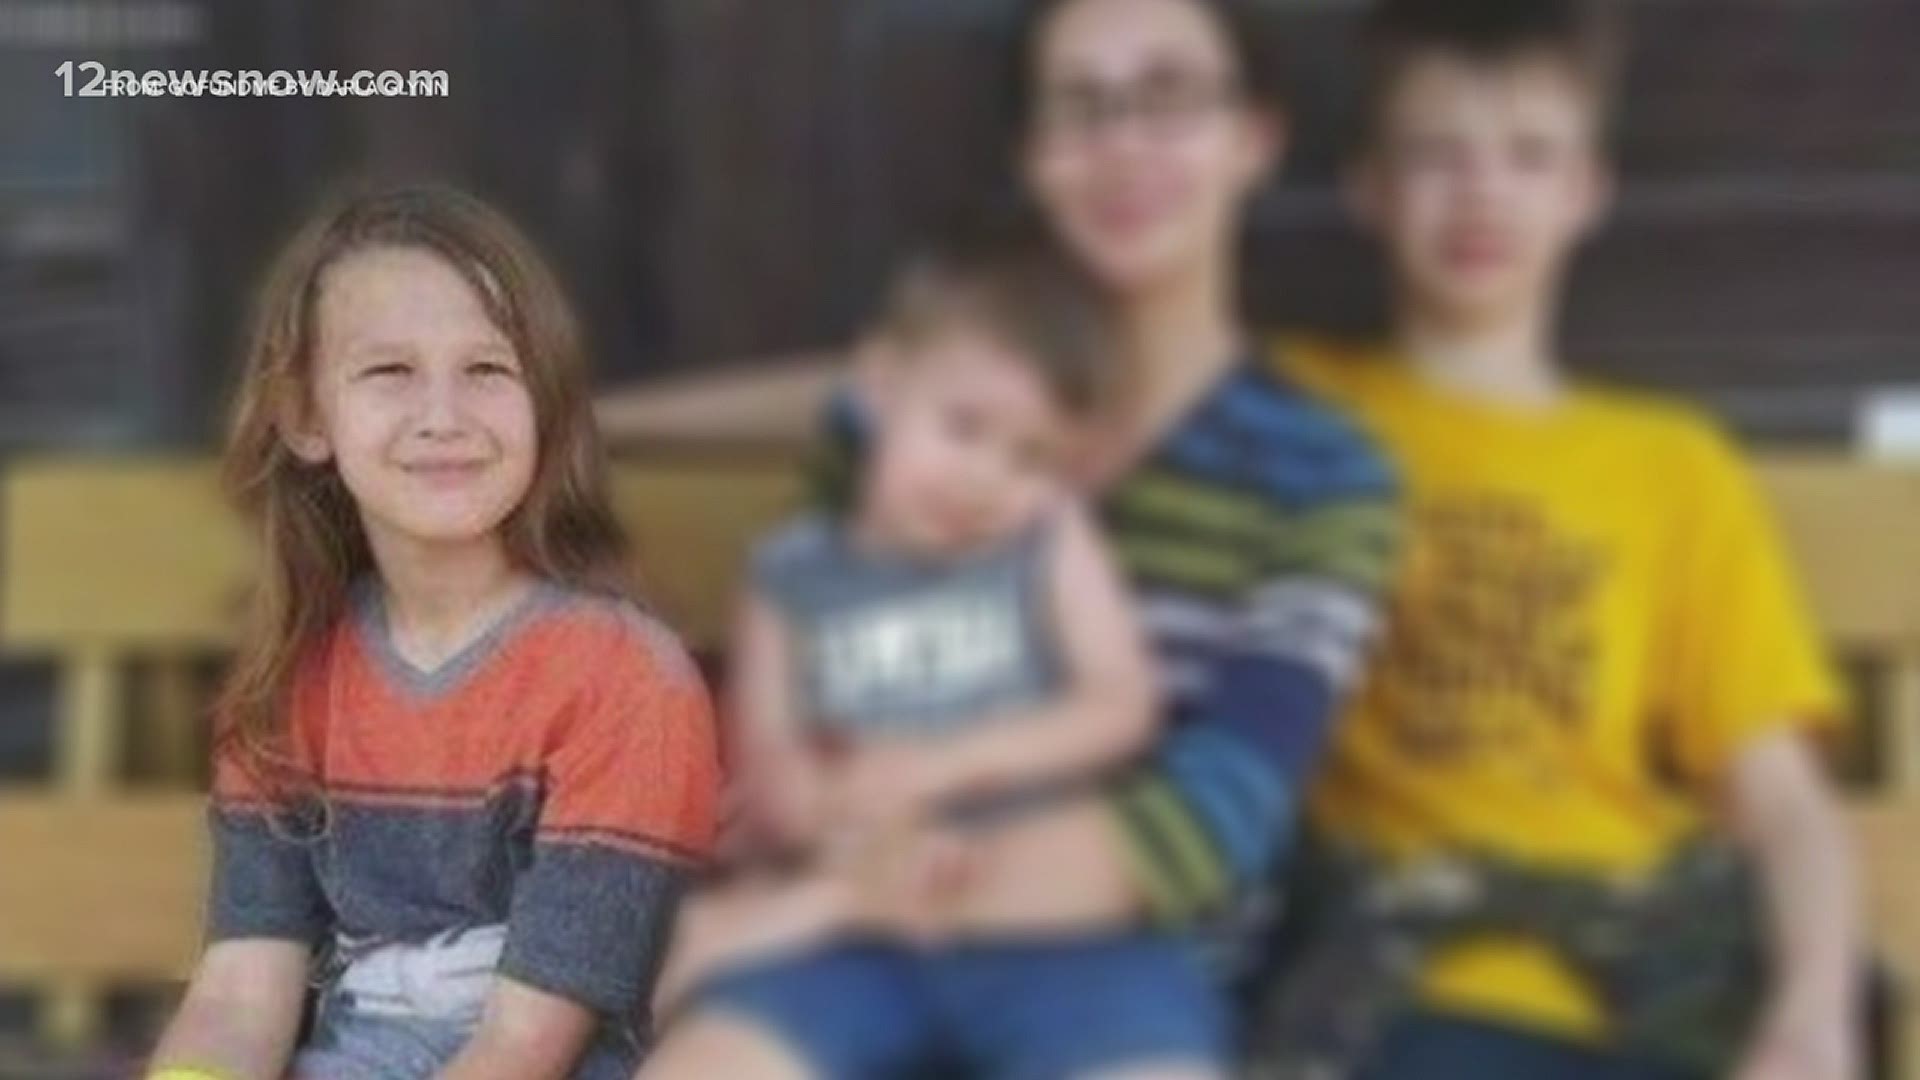 The fire claimed the life of 11-year-old Noah Randell. A GoFundMe has been set up to help the family after the fire destroyed their home.